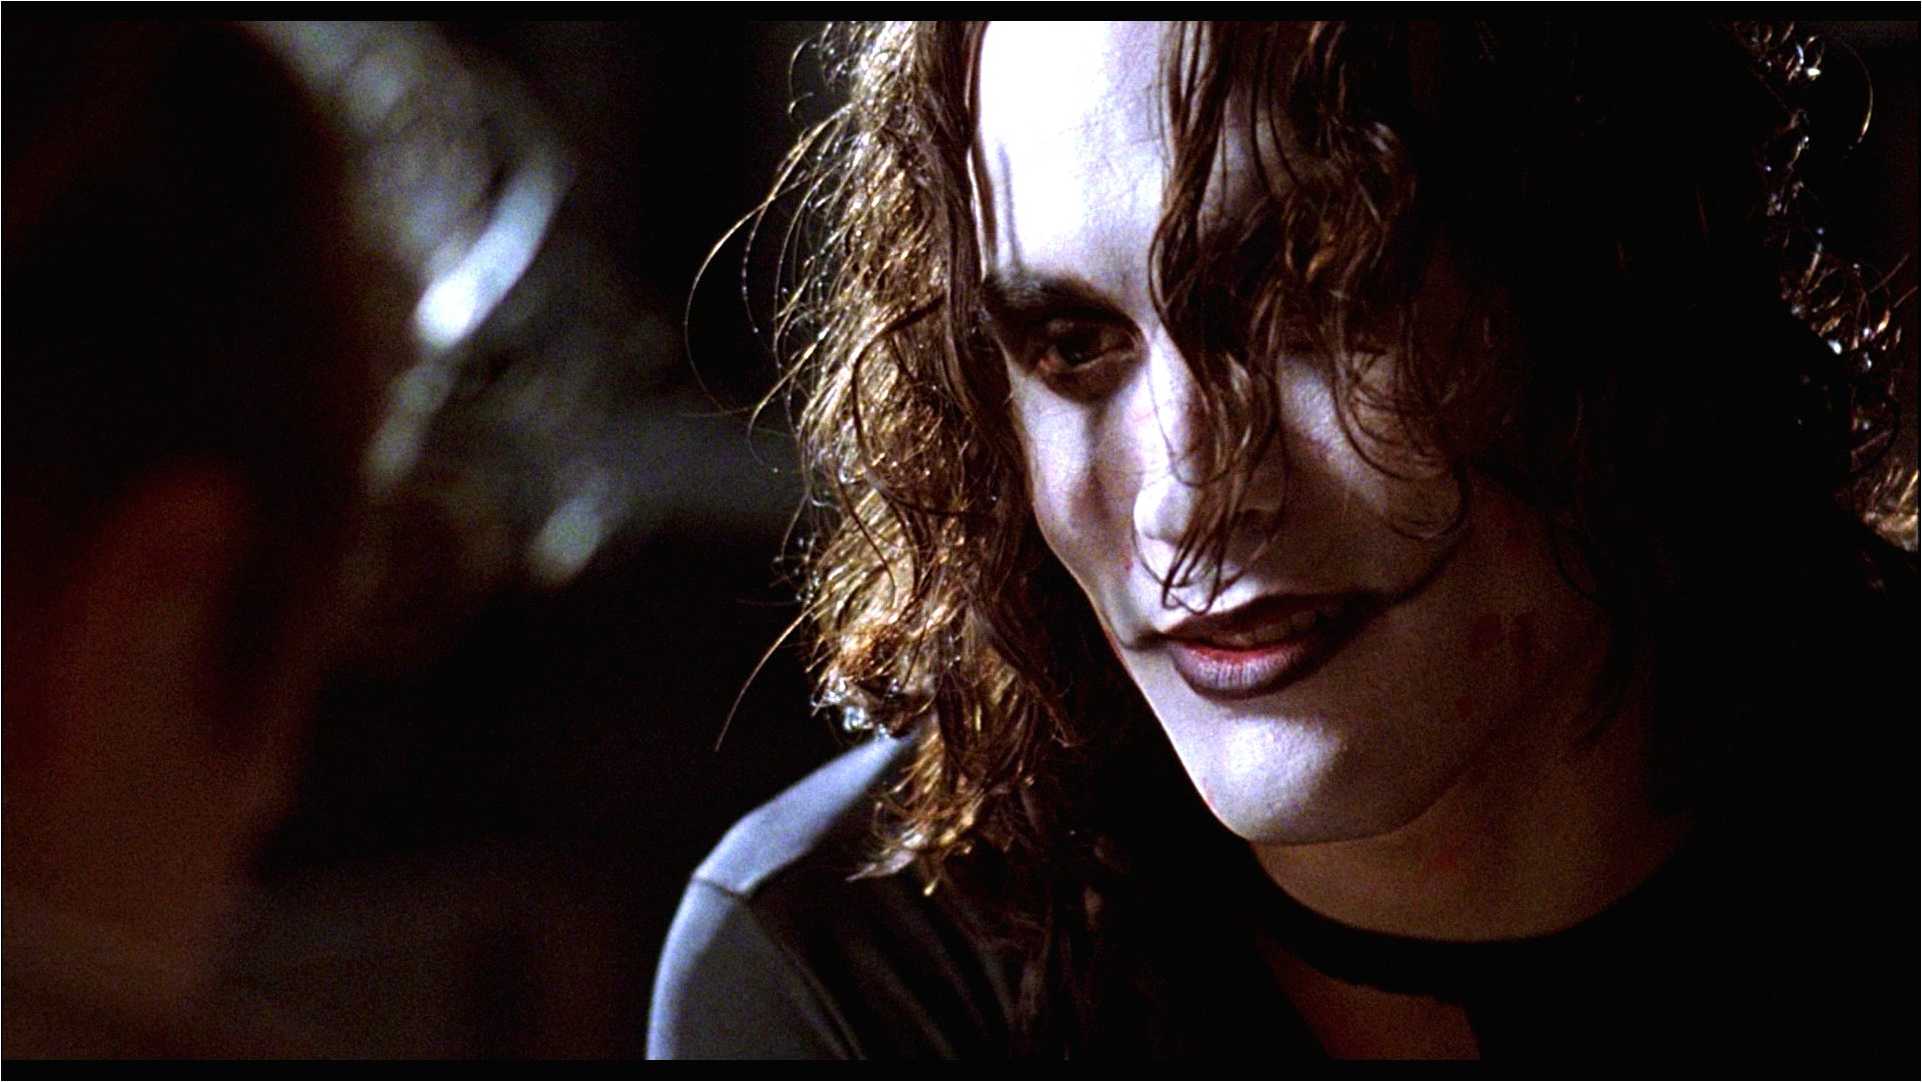 The Crow Wallpaper, HD Creative The Crow Image, Full HD Wallpaper